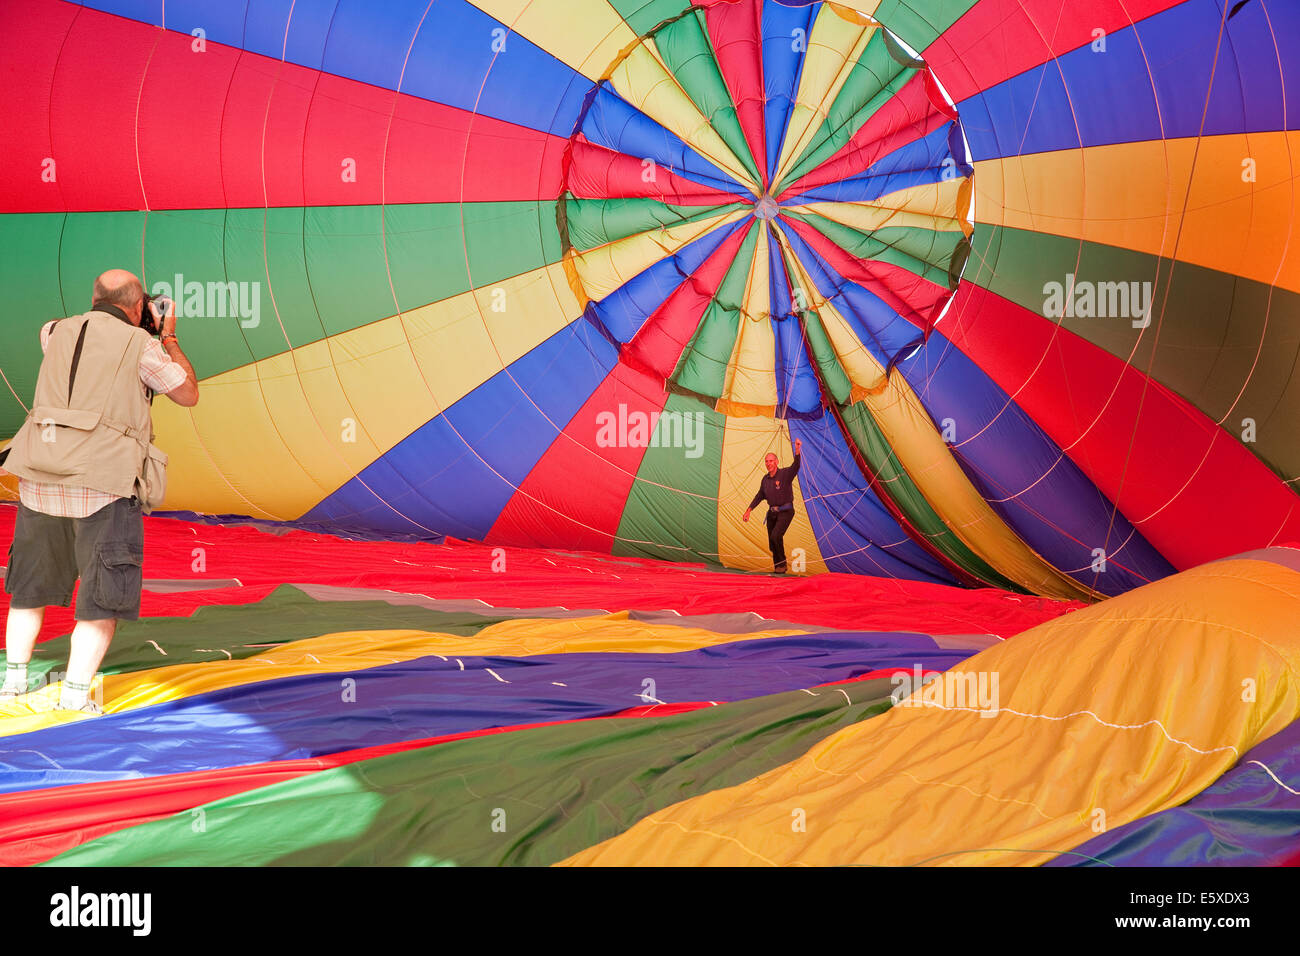 Bristol, UK. 7th August, 2014. Standing inside a balloon at the Bristol International Balloon Fiesta Credit: Keith Larby/Alamy Live News Stock Photo